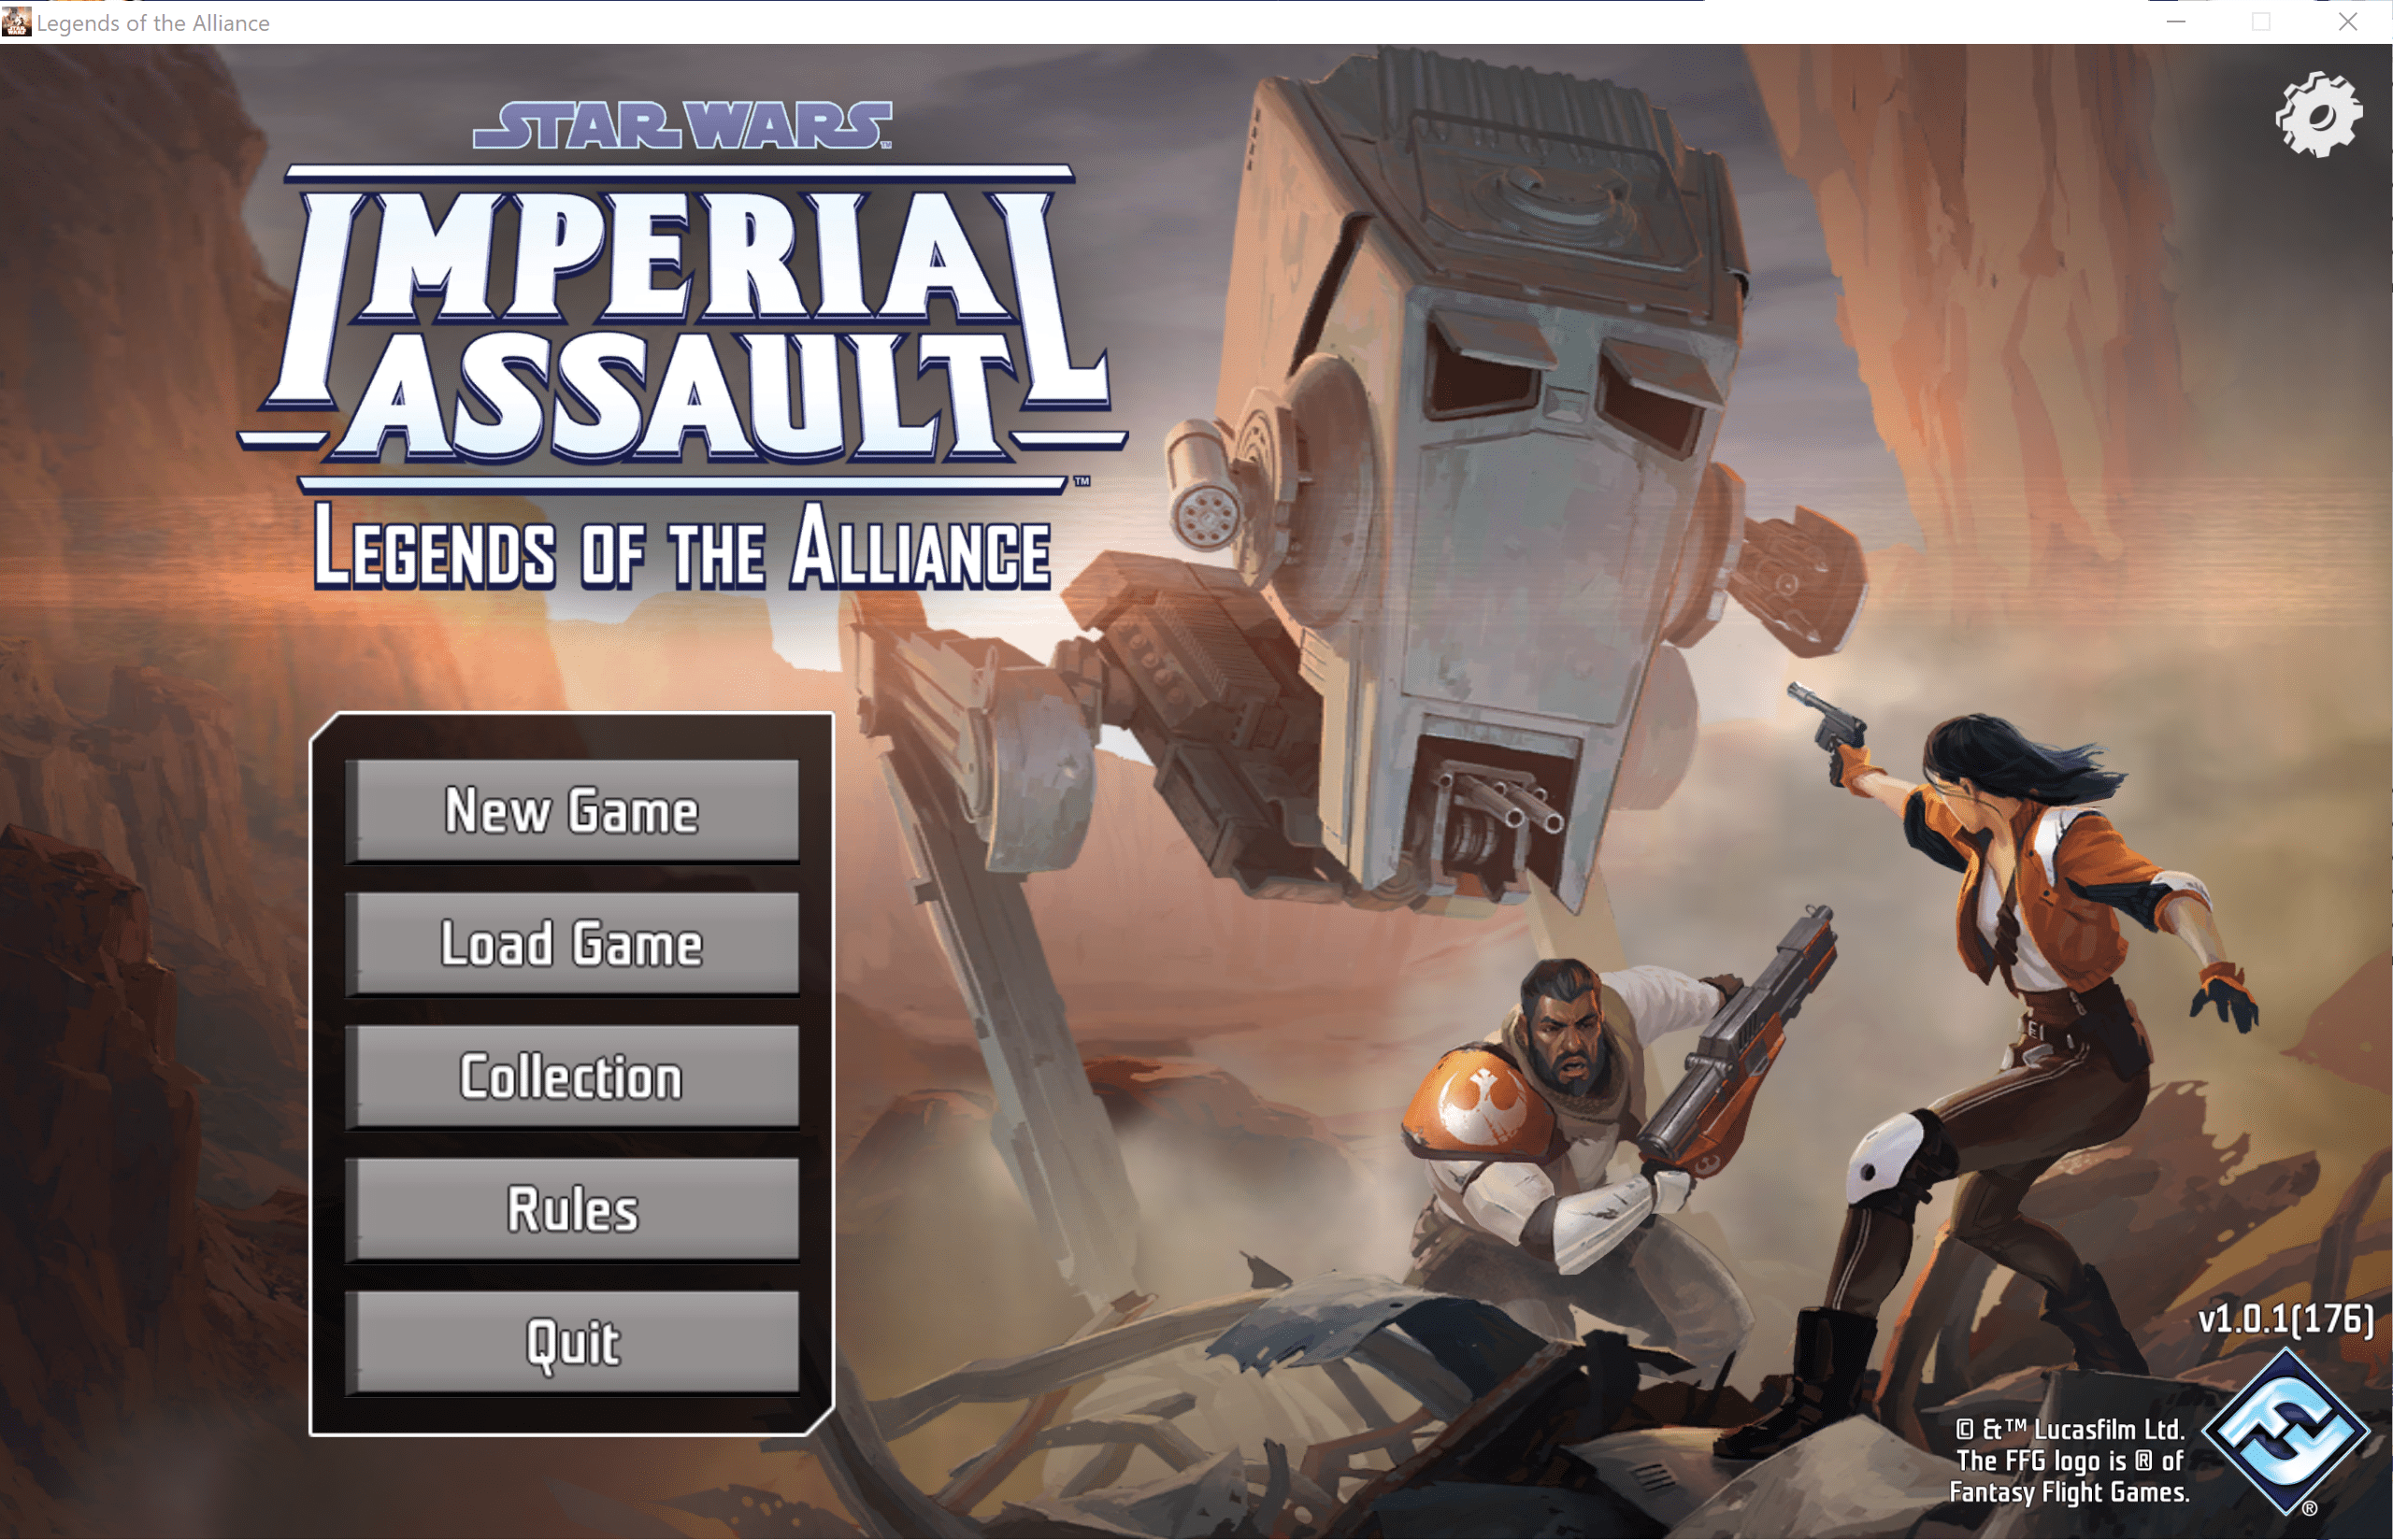 Star Wars: Imperial Assault – Legends of the Alliance